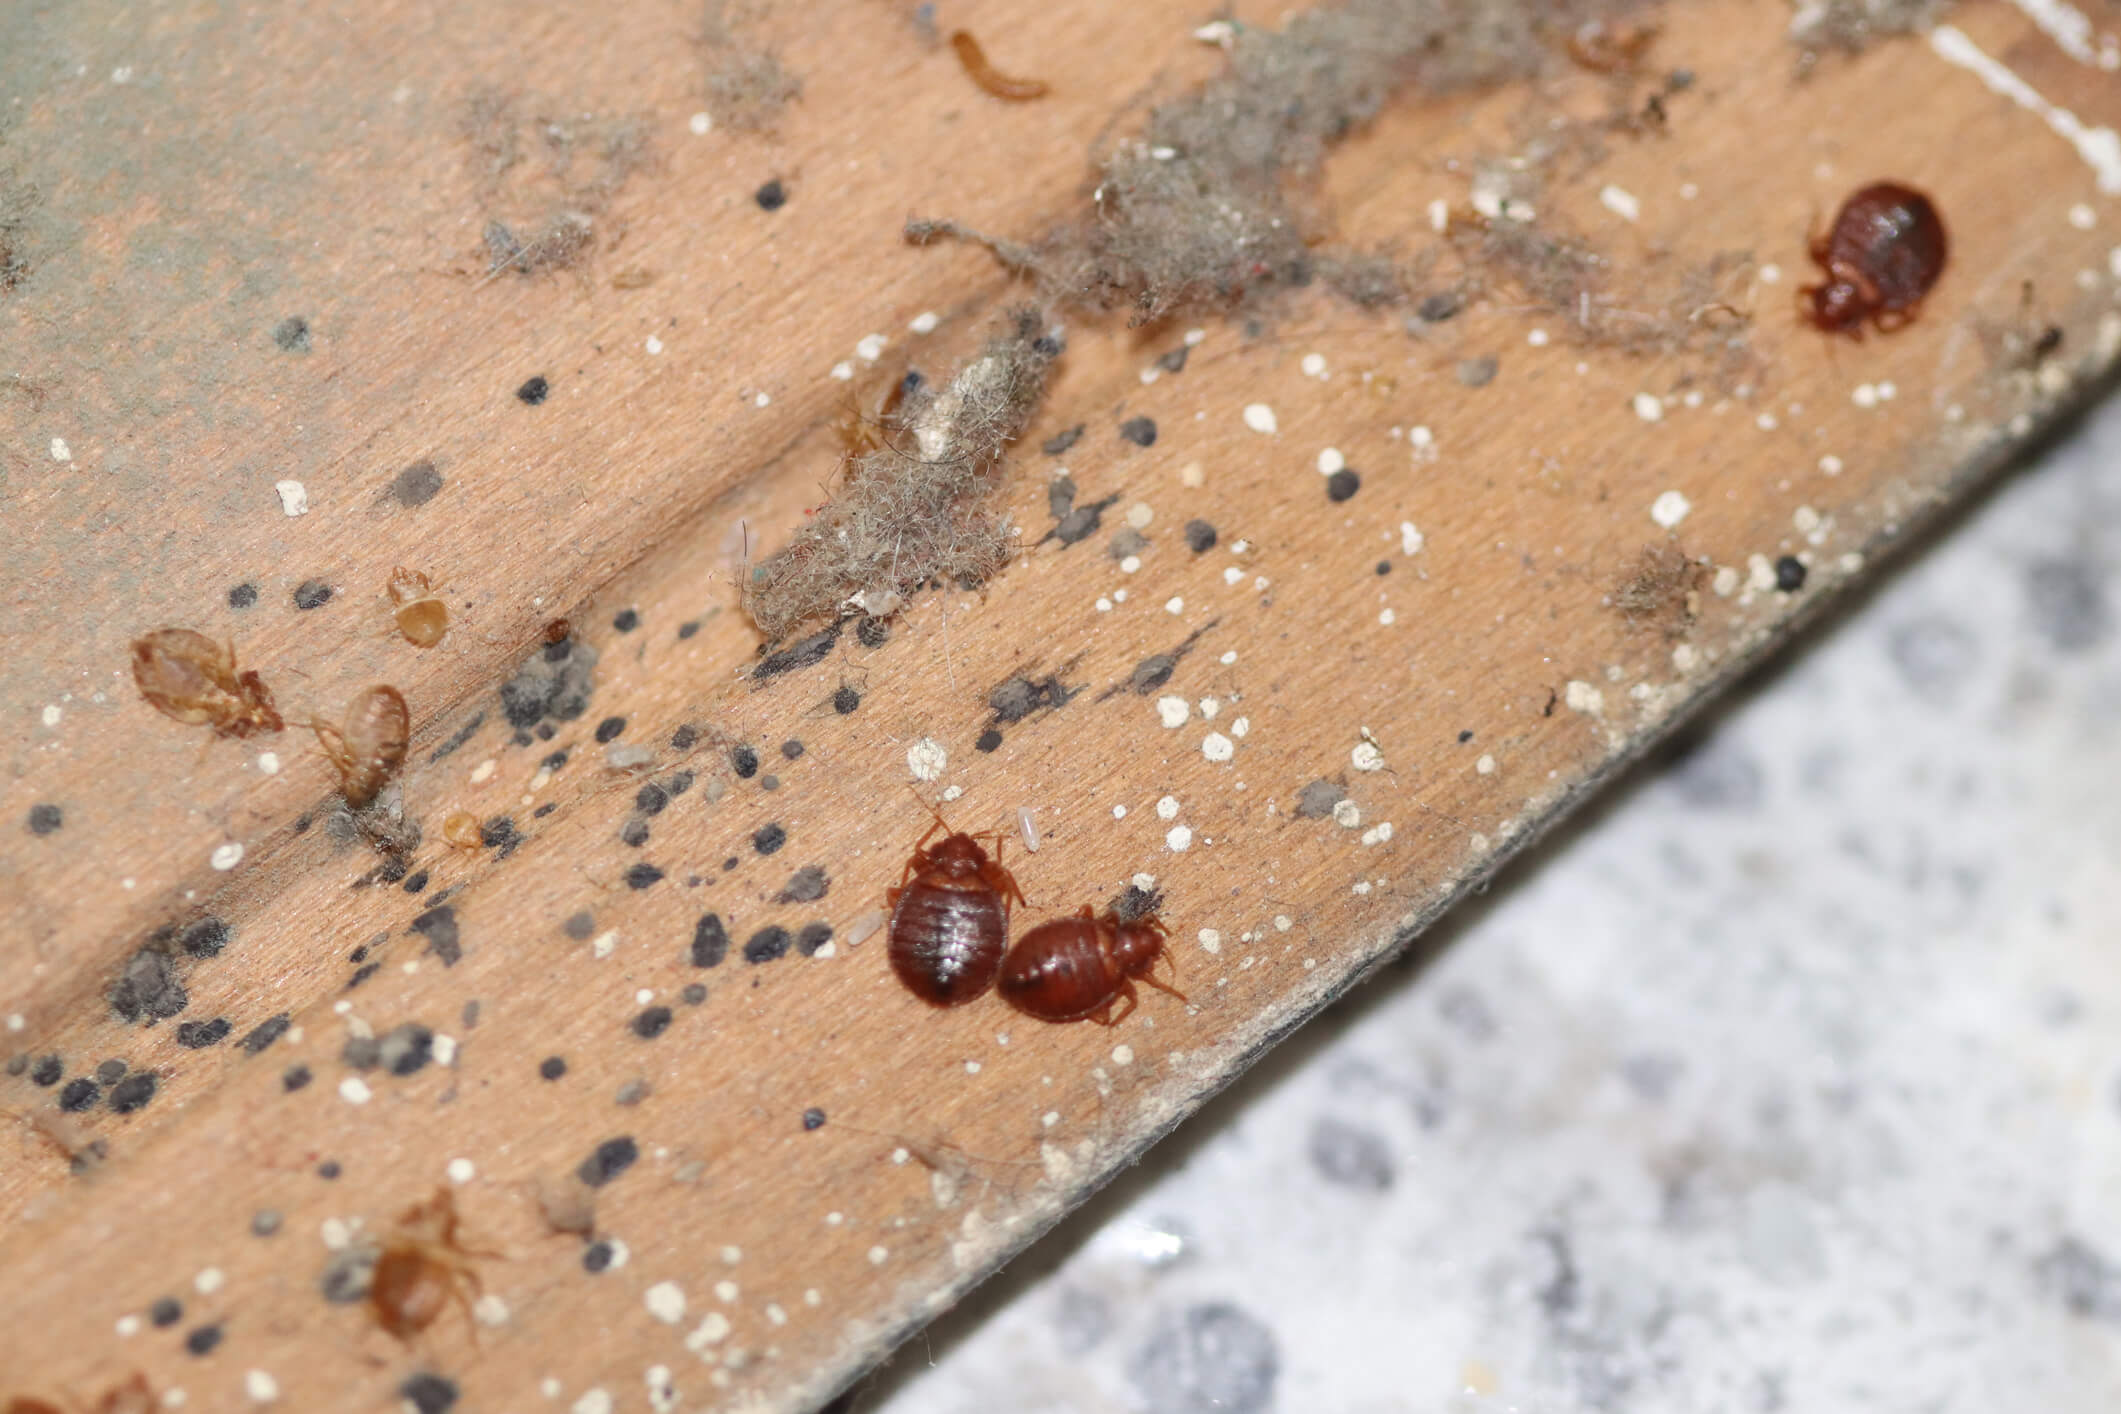 How Are Bed Bugs Formed?